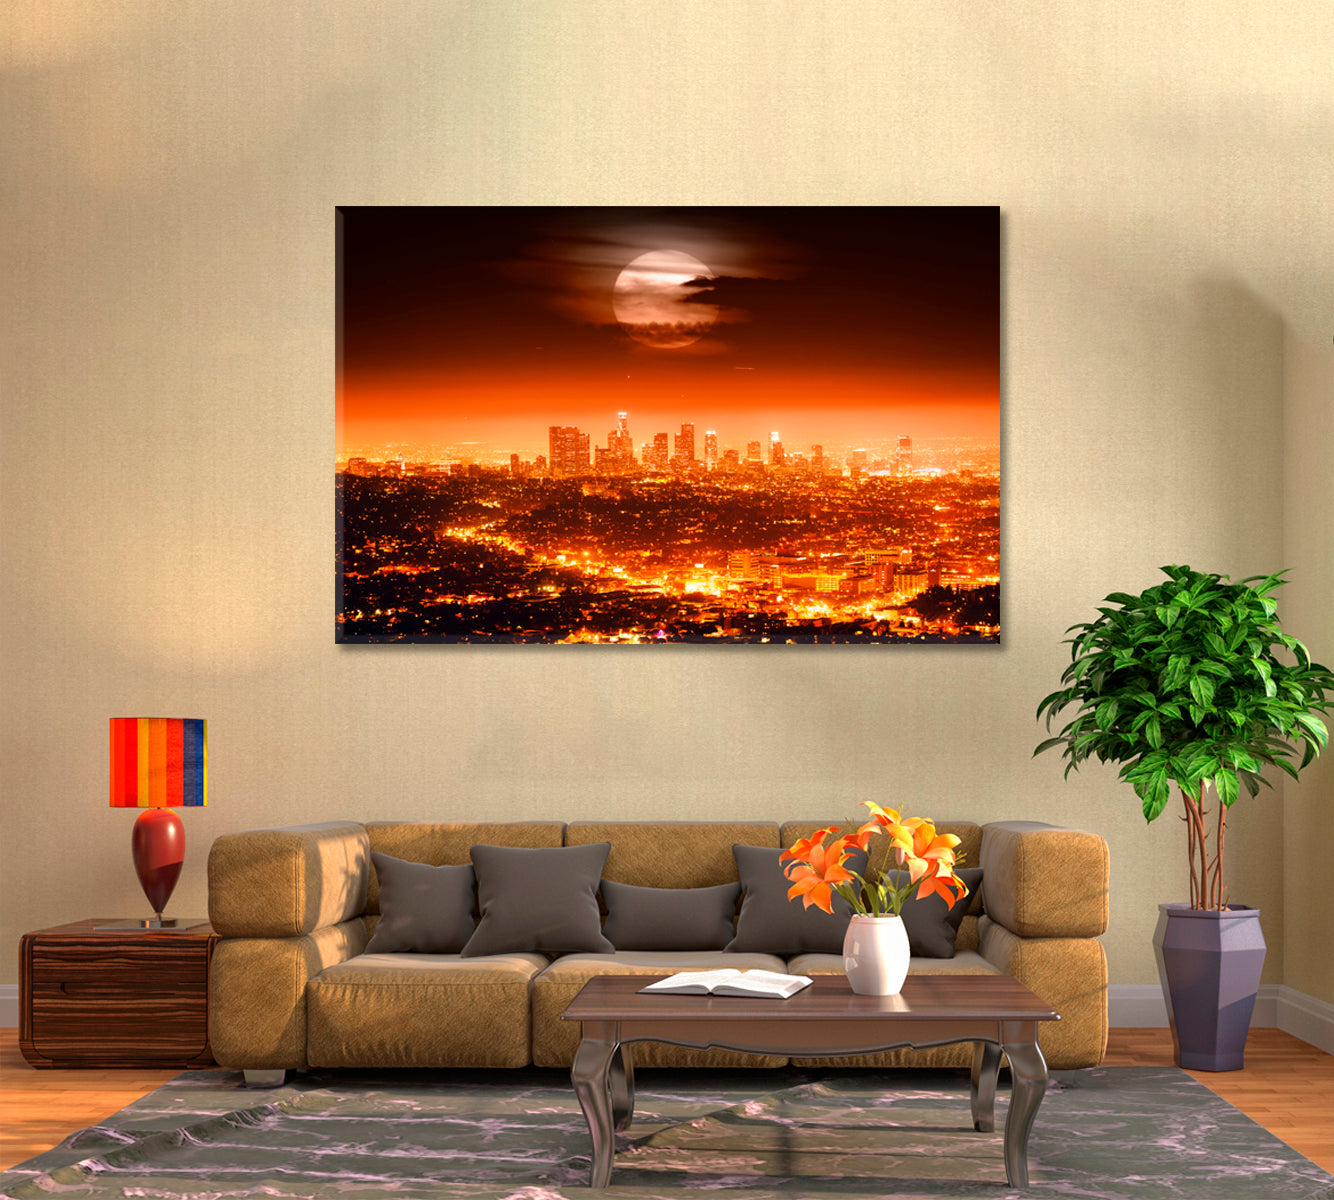 Los Angeles Skyline at Full Moon Canvas Print ArtLexy 1 Panel 24"x16" inches 